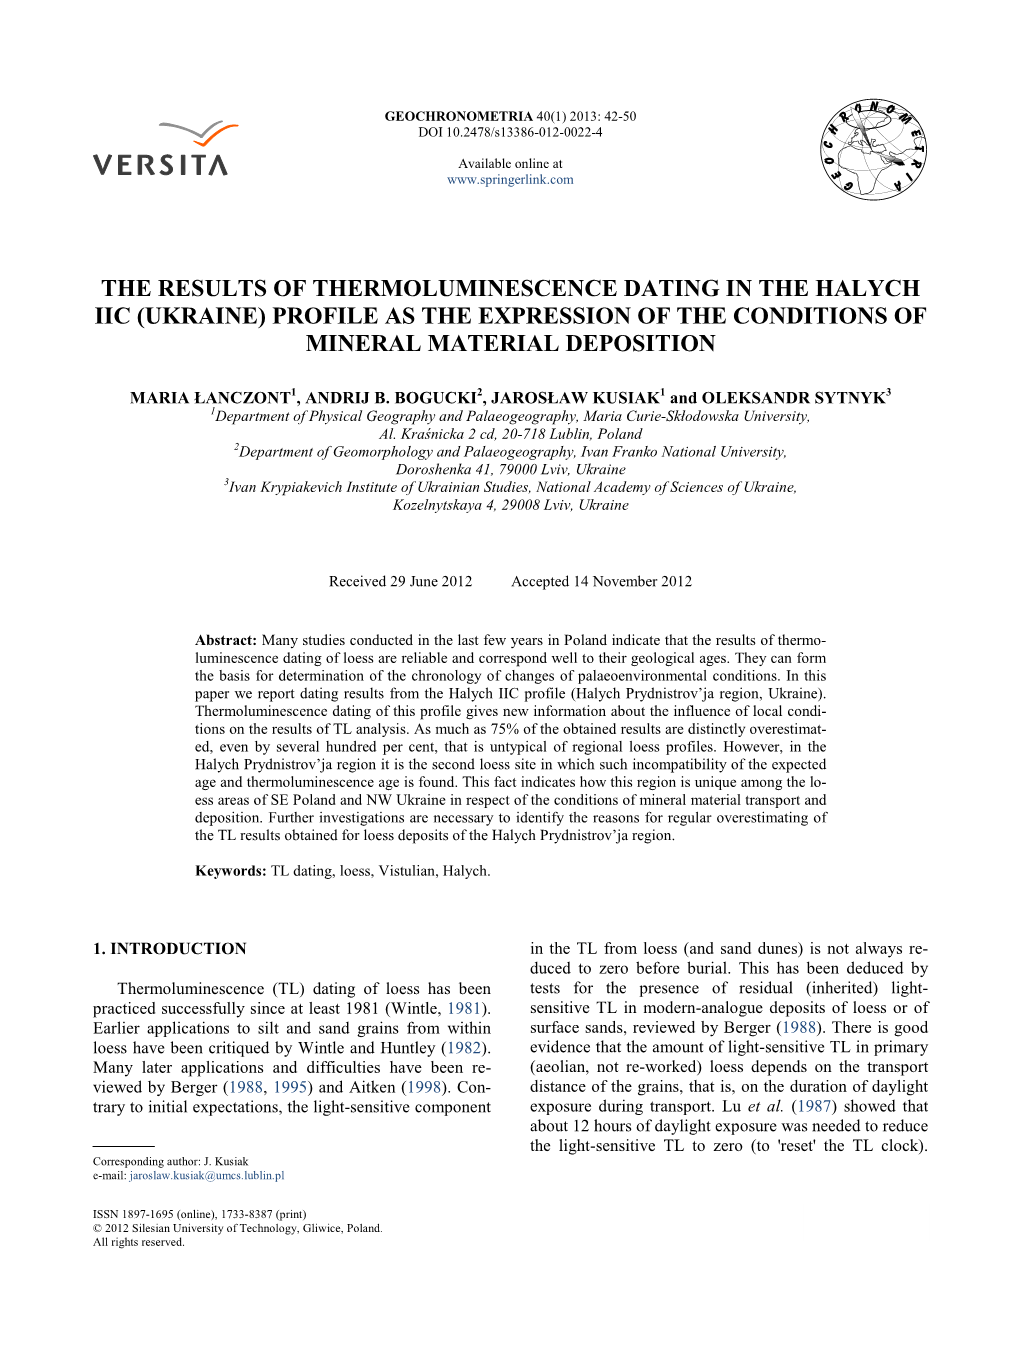 The Results of Thermoluminescence Dating in the Halych Iic (Ukraine) Profile As the Expression of the Conditions of Mineral Material Deposition